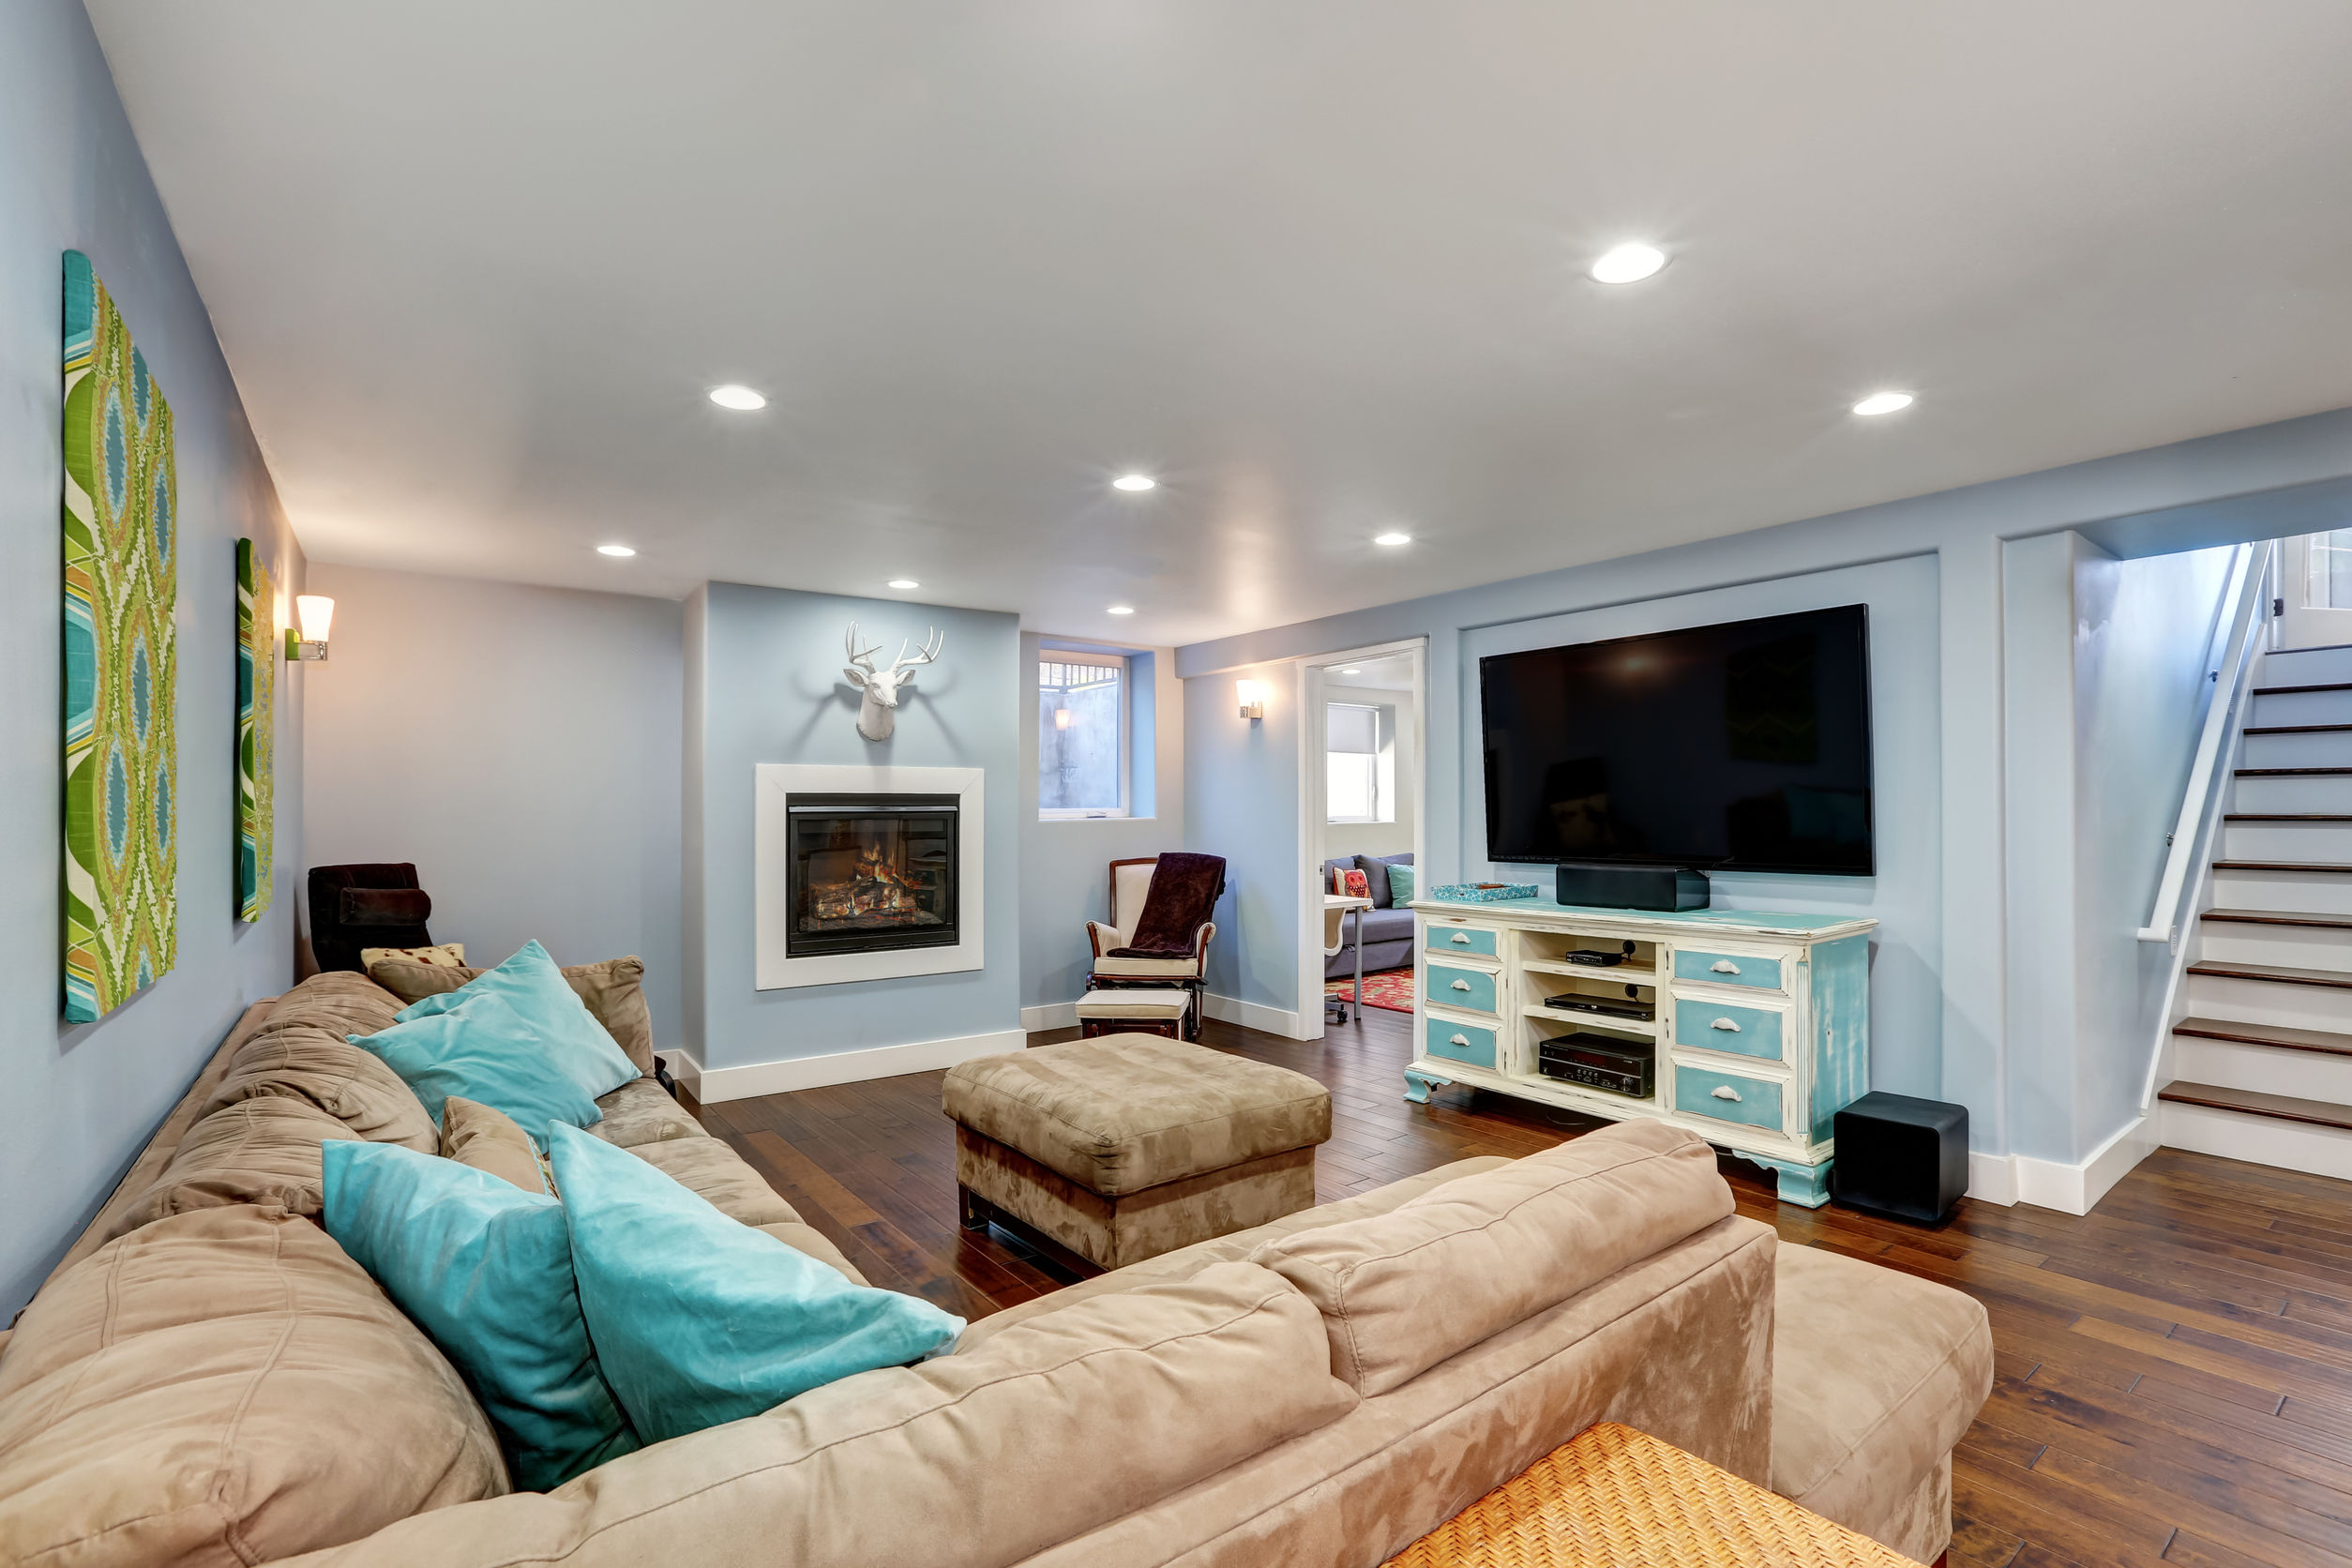 62161255 - pastel blue walls in basement living room interior. large corner sofa with blue pillows and ottoman. vintage white and blue tv cabinet. northwest, usa